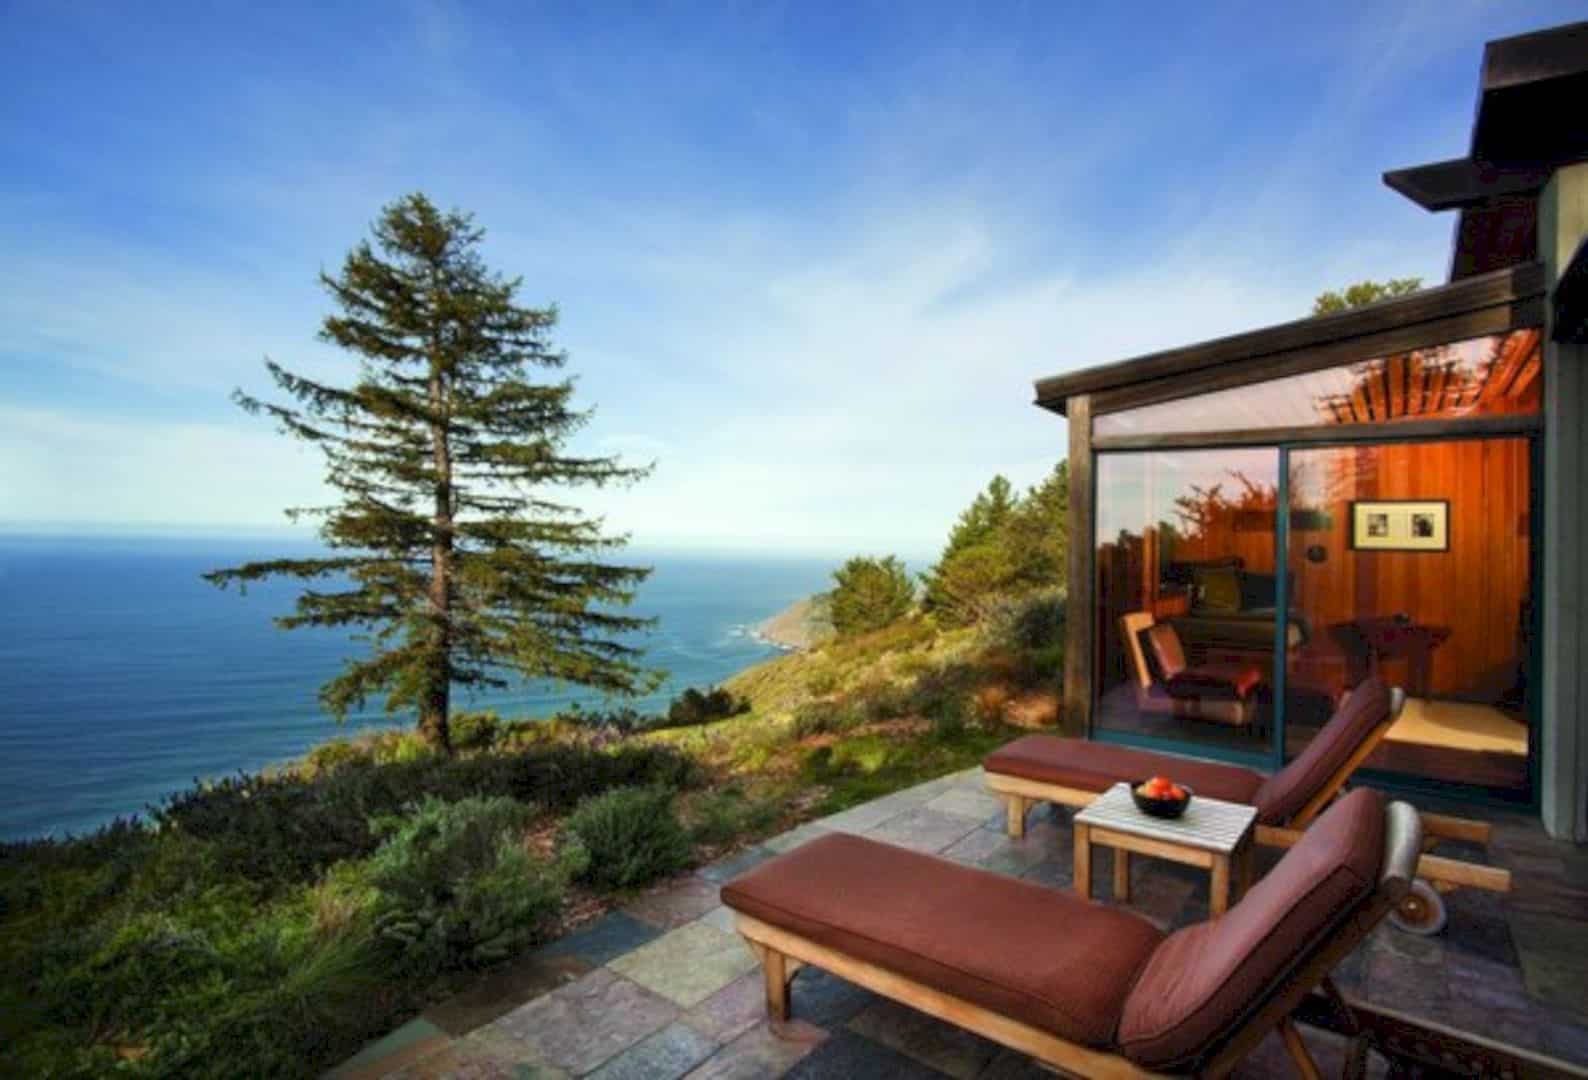 The Post Ranch Inn A Rustic Eco Luxury Hotel Overlooks The Pacific 4